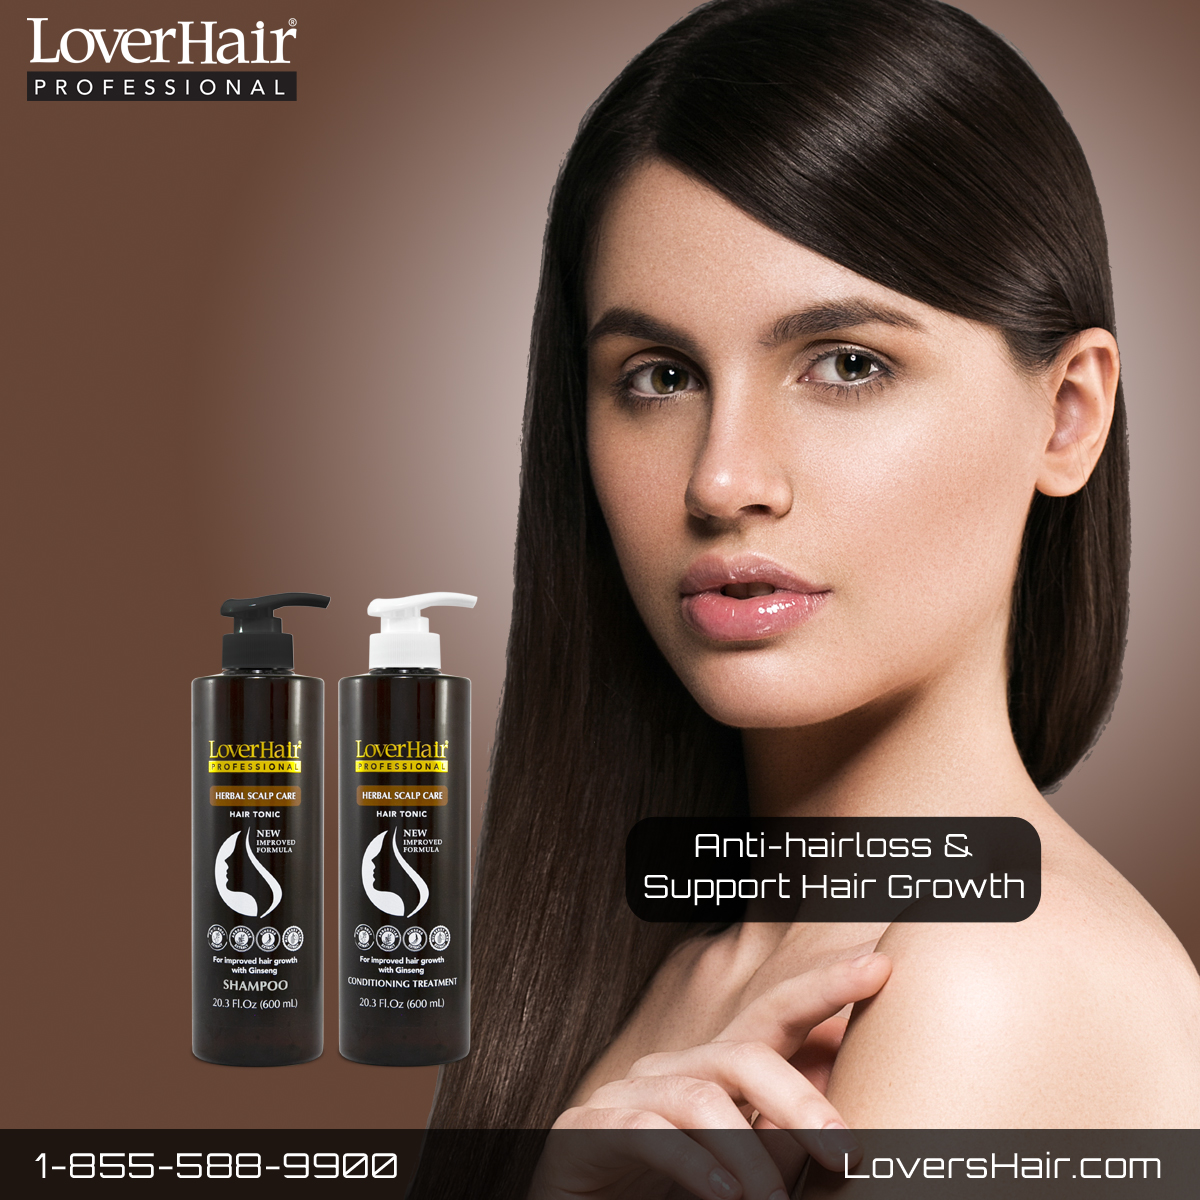 👩LoverHair Professional Herbal Scalp Care Shampoo with natural herbal extracts that are gentle on hair and scalp. I✅FO-TI EXTRACT ✅ARBORVITAE EXTRACT ✅GINSENG EXTRACT ✅MULBERRY BARK EXTRACT ✅20 fl oz bit.ly/3IkLwHJ #shampoo #conditioner #loverhair #scalpcare